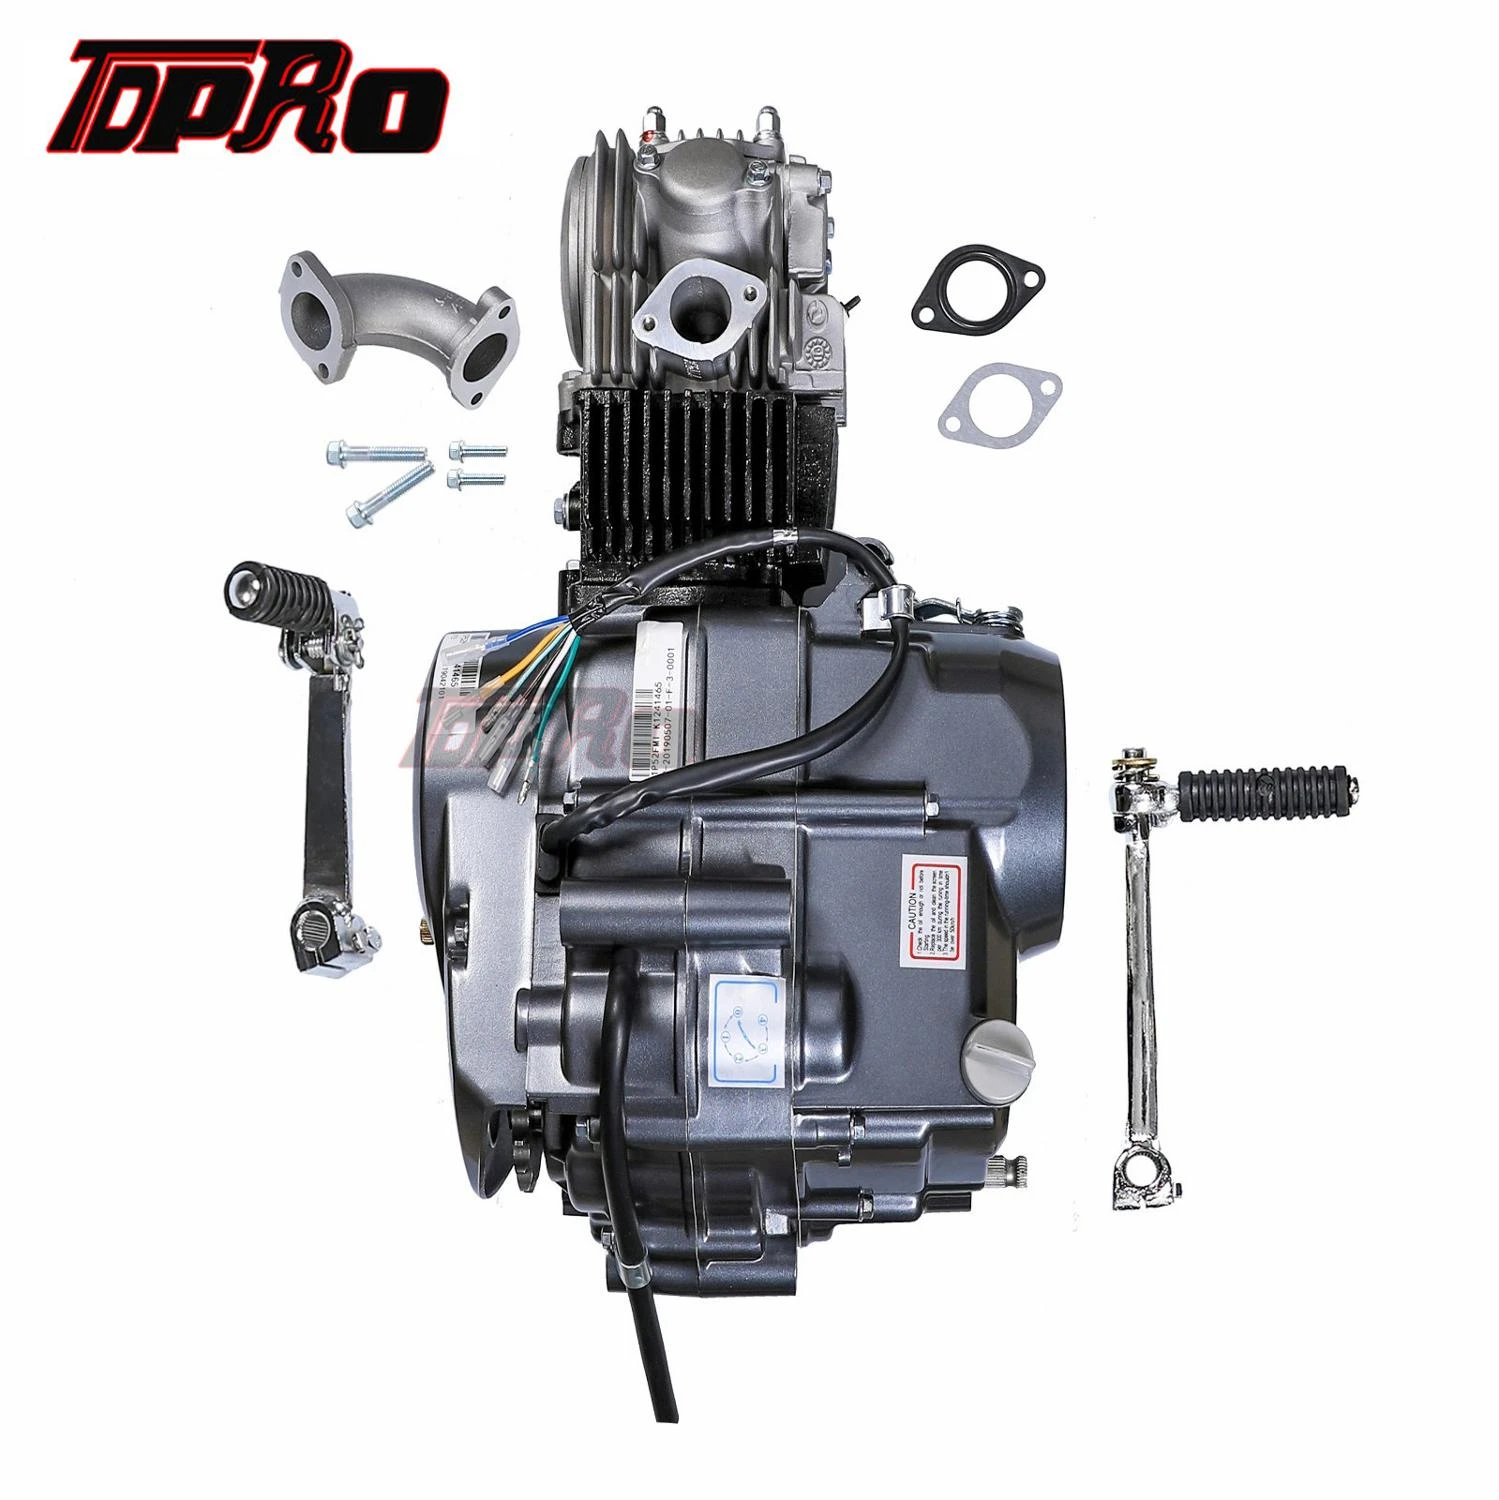 Tdpro Lifan 4 Stroke 125cc Engine Motor Motorcycle Pit Dirt Start Engines For Honda Xr50 Crf50 Xr70 Crf70 Ct70 St70 110cc - Engines & Engine Parts - AliExpress